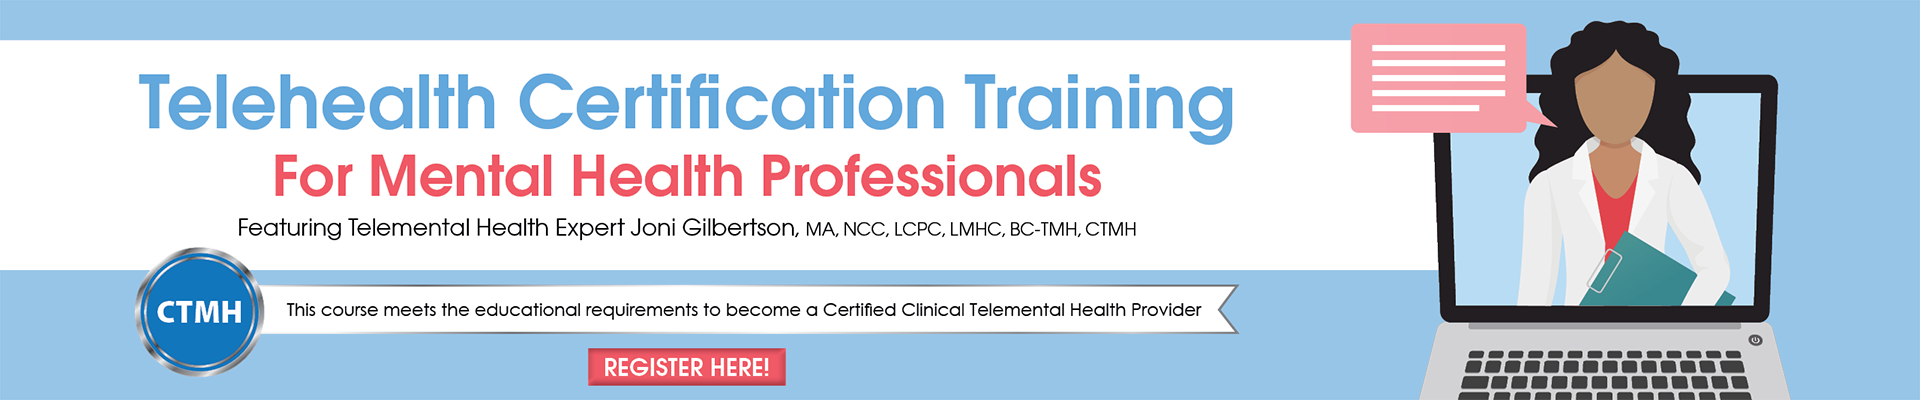 Telehealth Certification Training for Mental Health Professionals